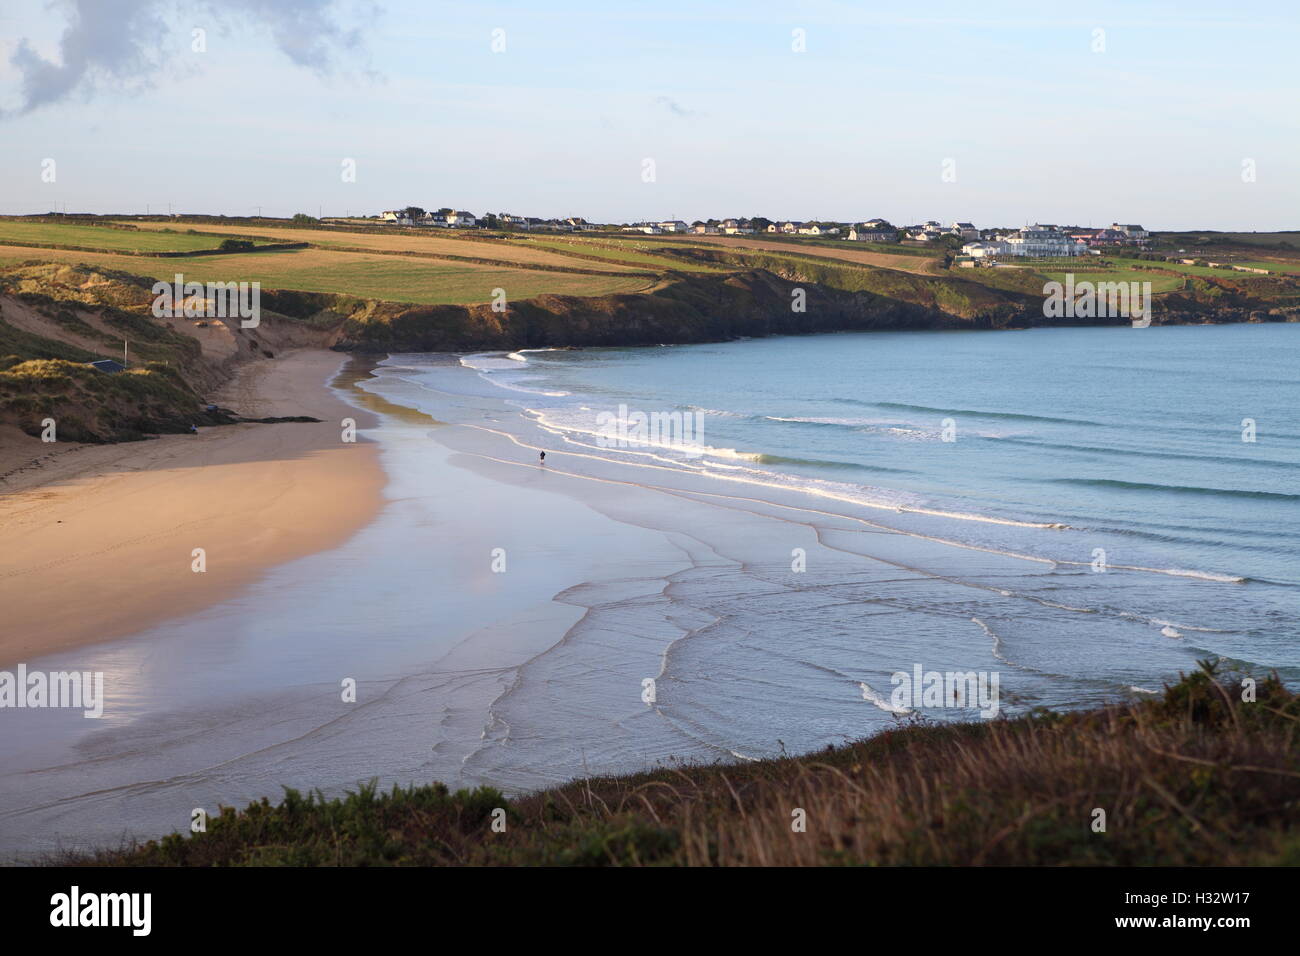 PENTIRE, NEWQUAY, CORNWALL, UK - OCTOBER 3, 2016: Early morning views along Pentire in Newquay, and out over the River Gannel Stock Photo